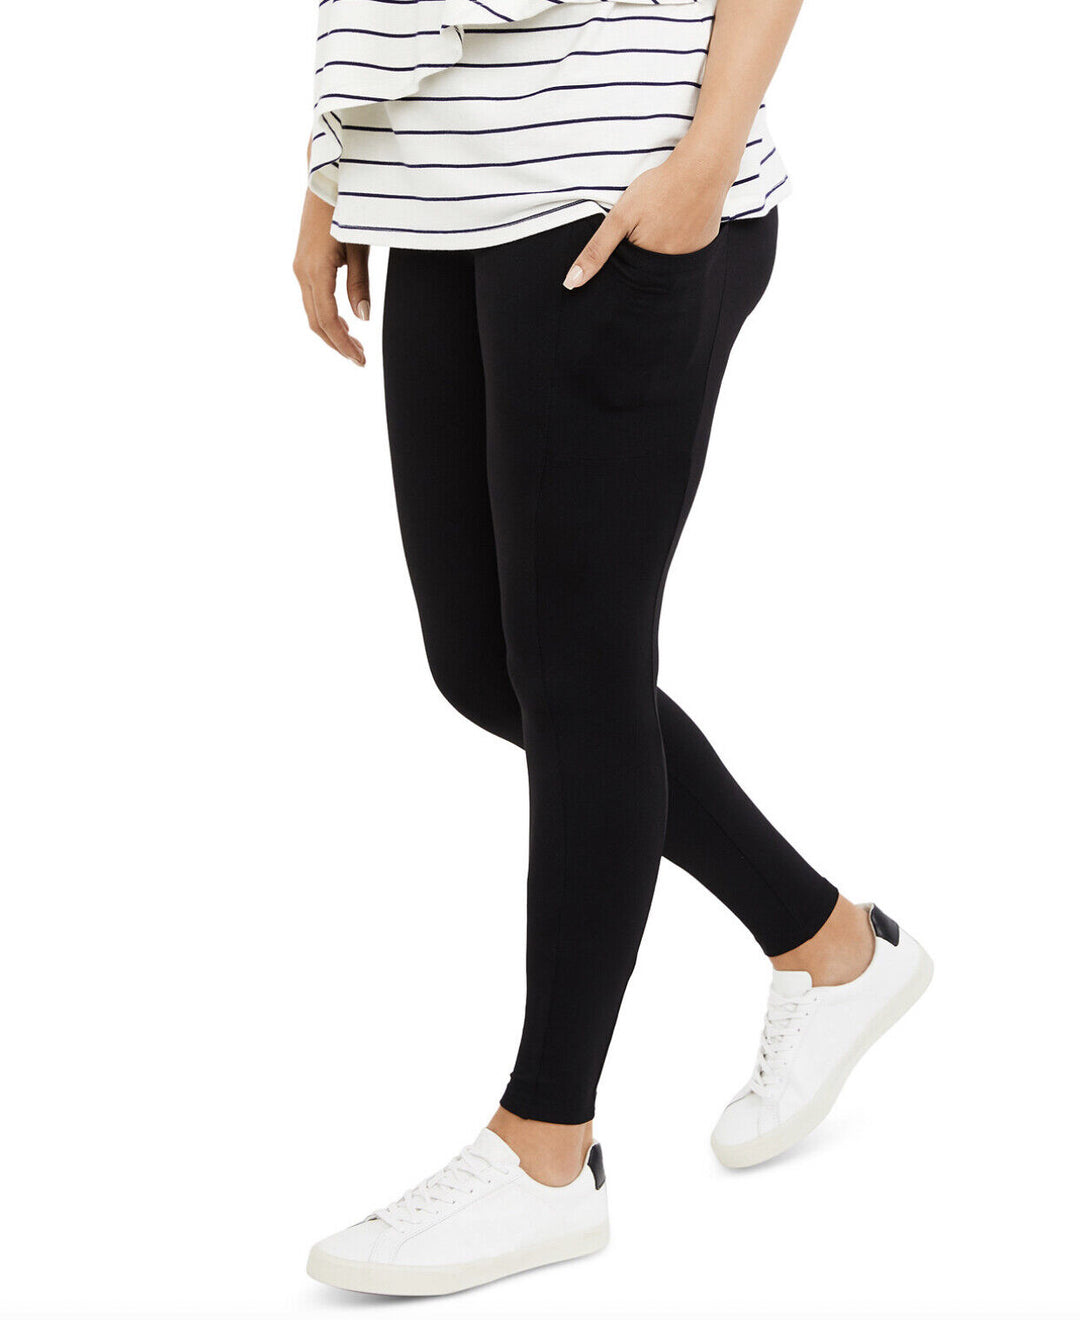 Maternity Post-Pregnancy French Terry Leggings